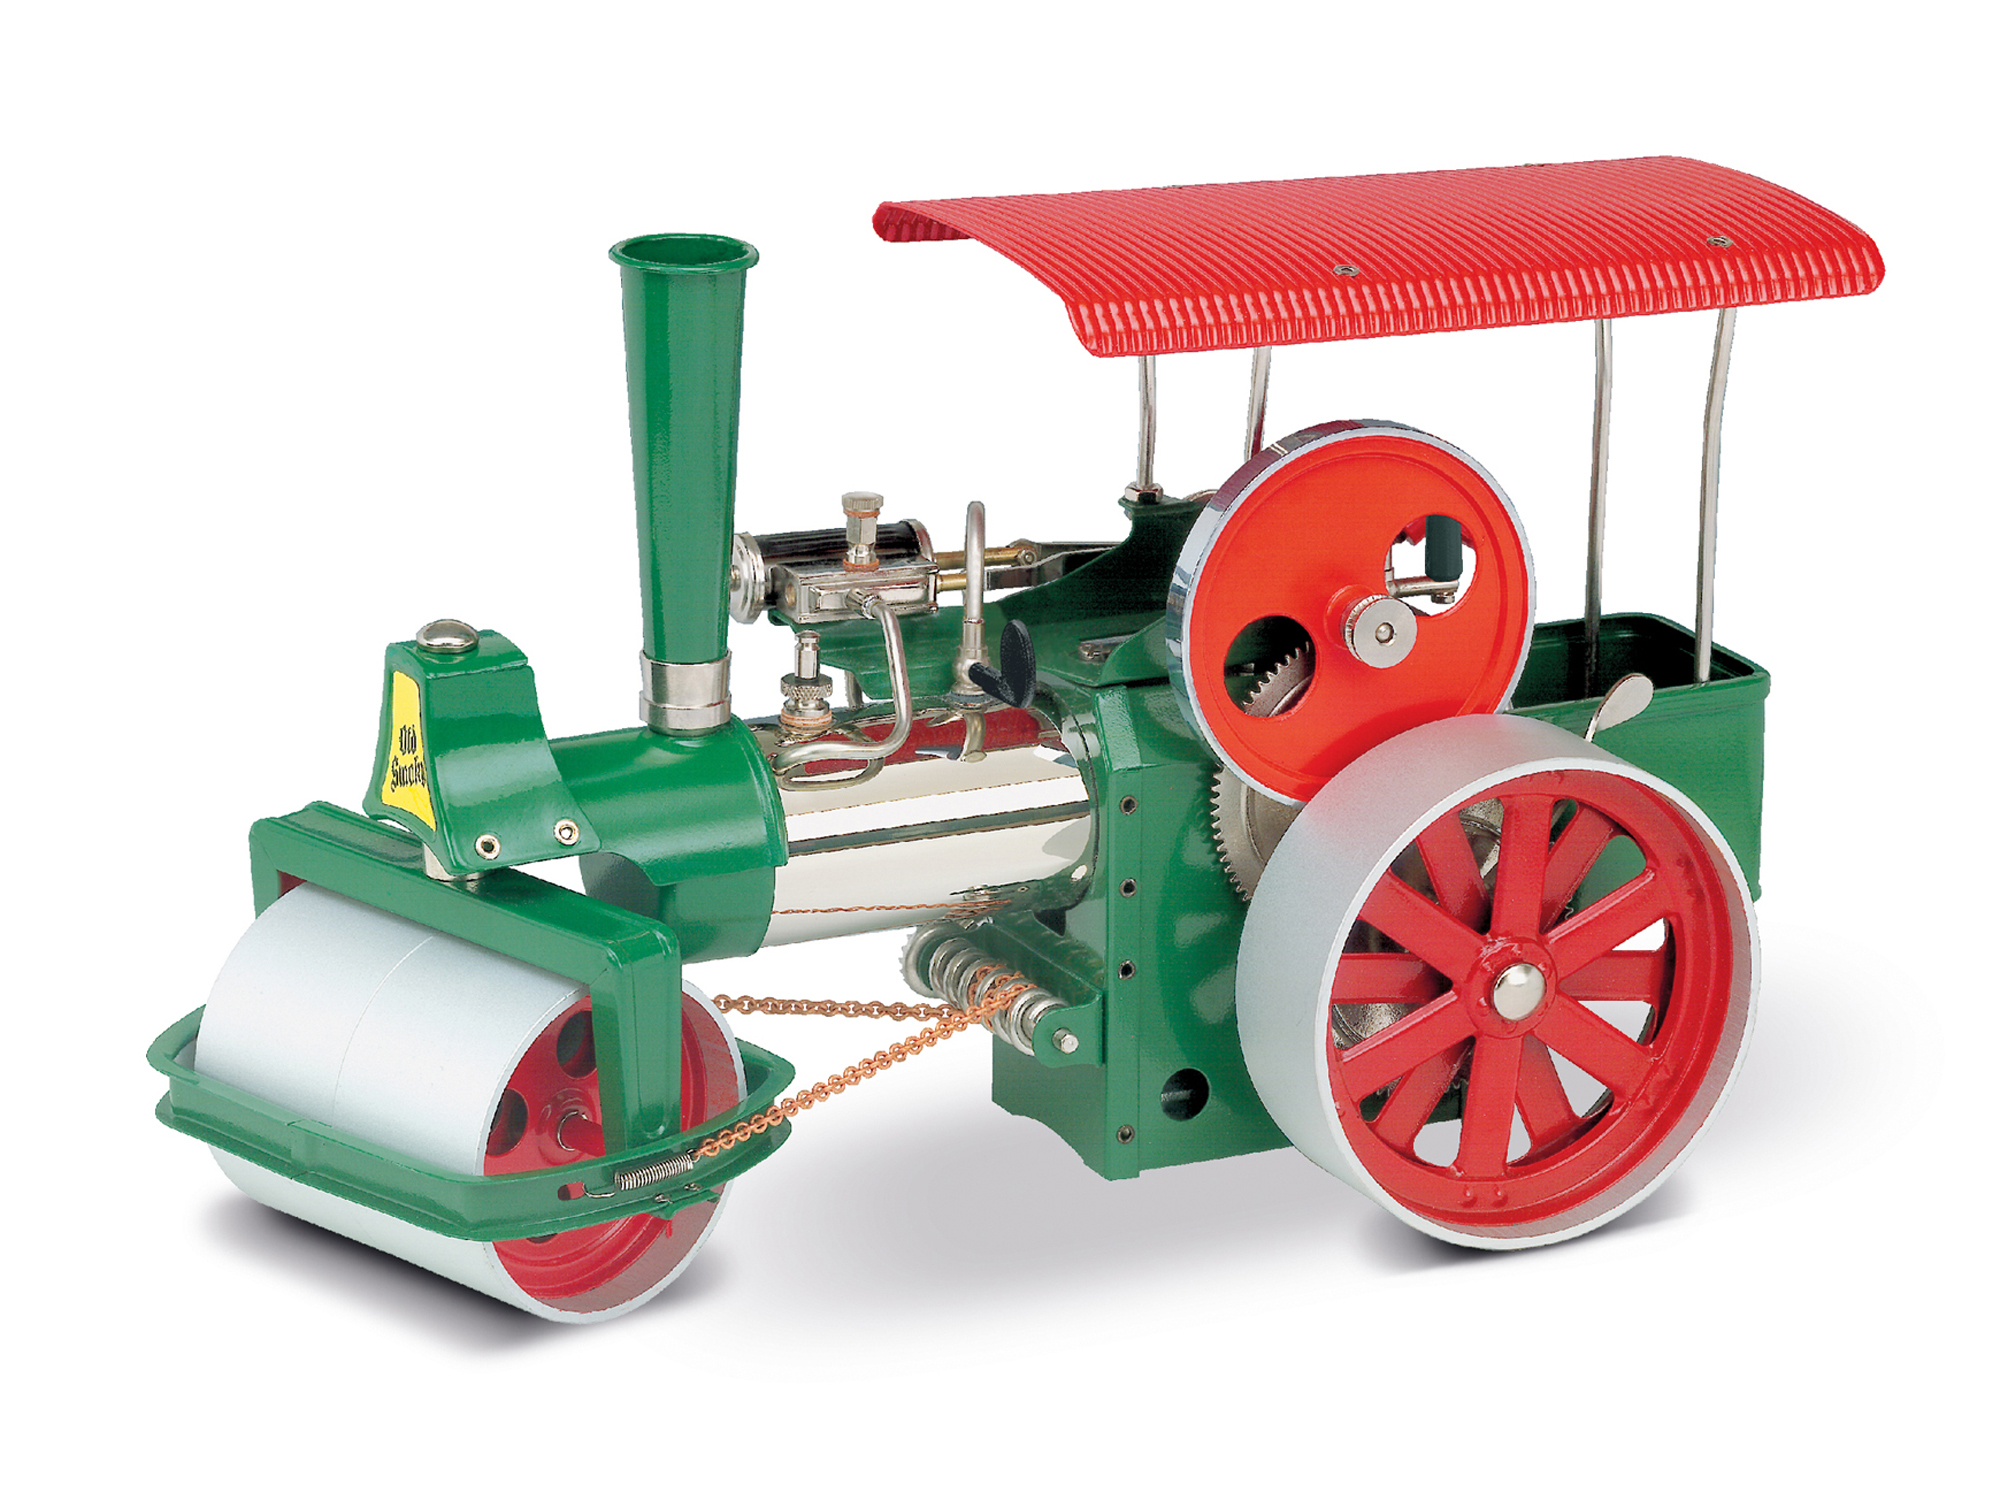 The Wilesco Old Smoky D375 Steam Roller Kit